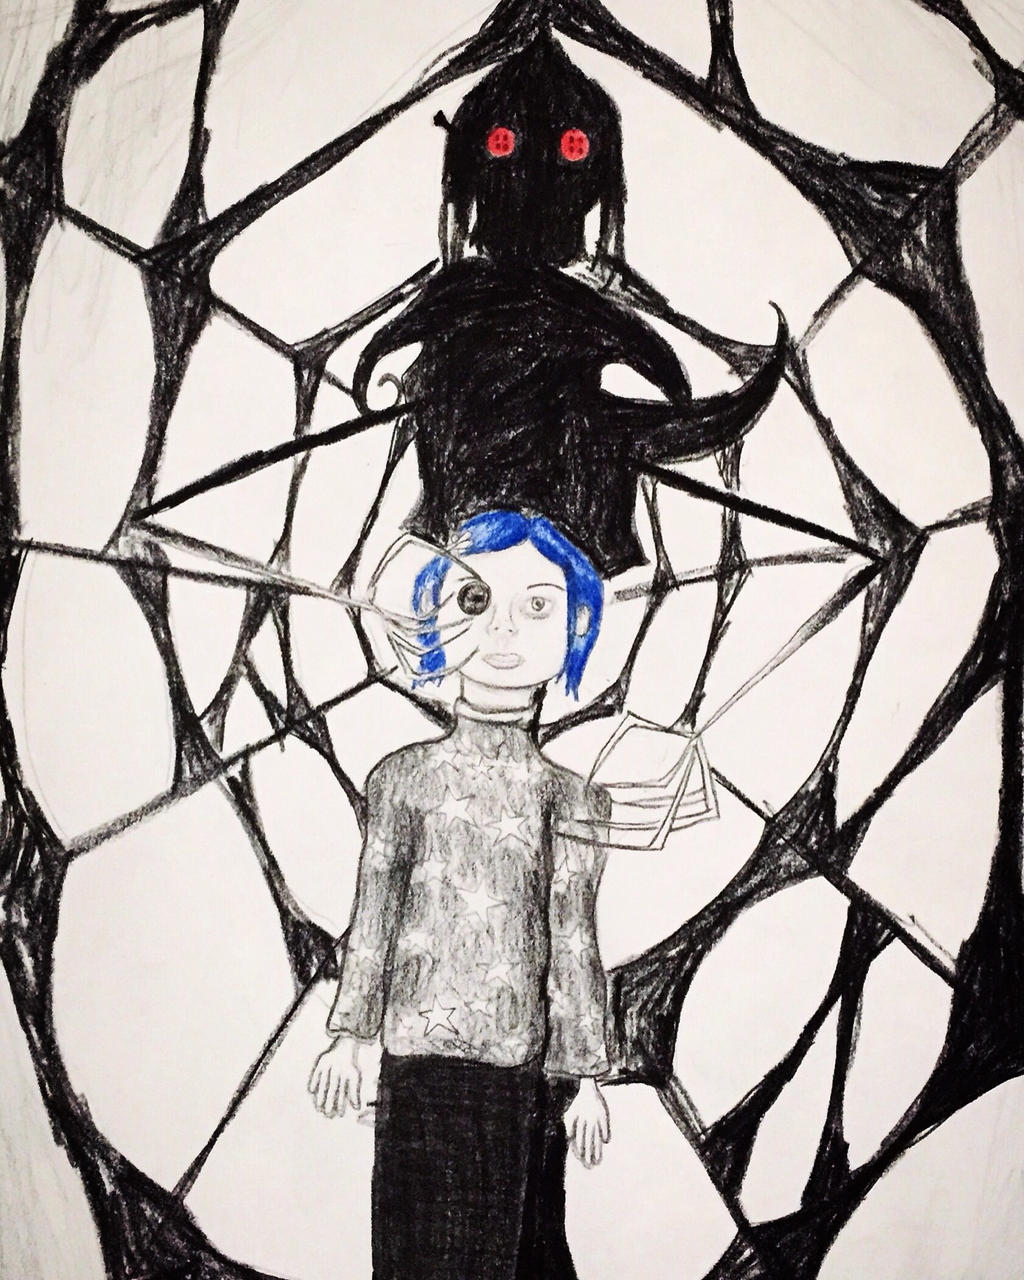 Coraline inspired drawing